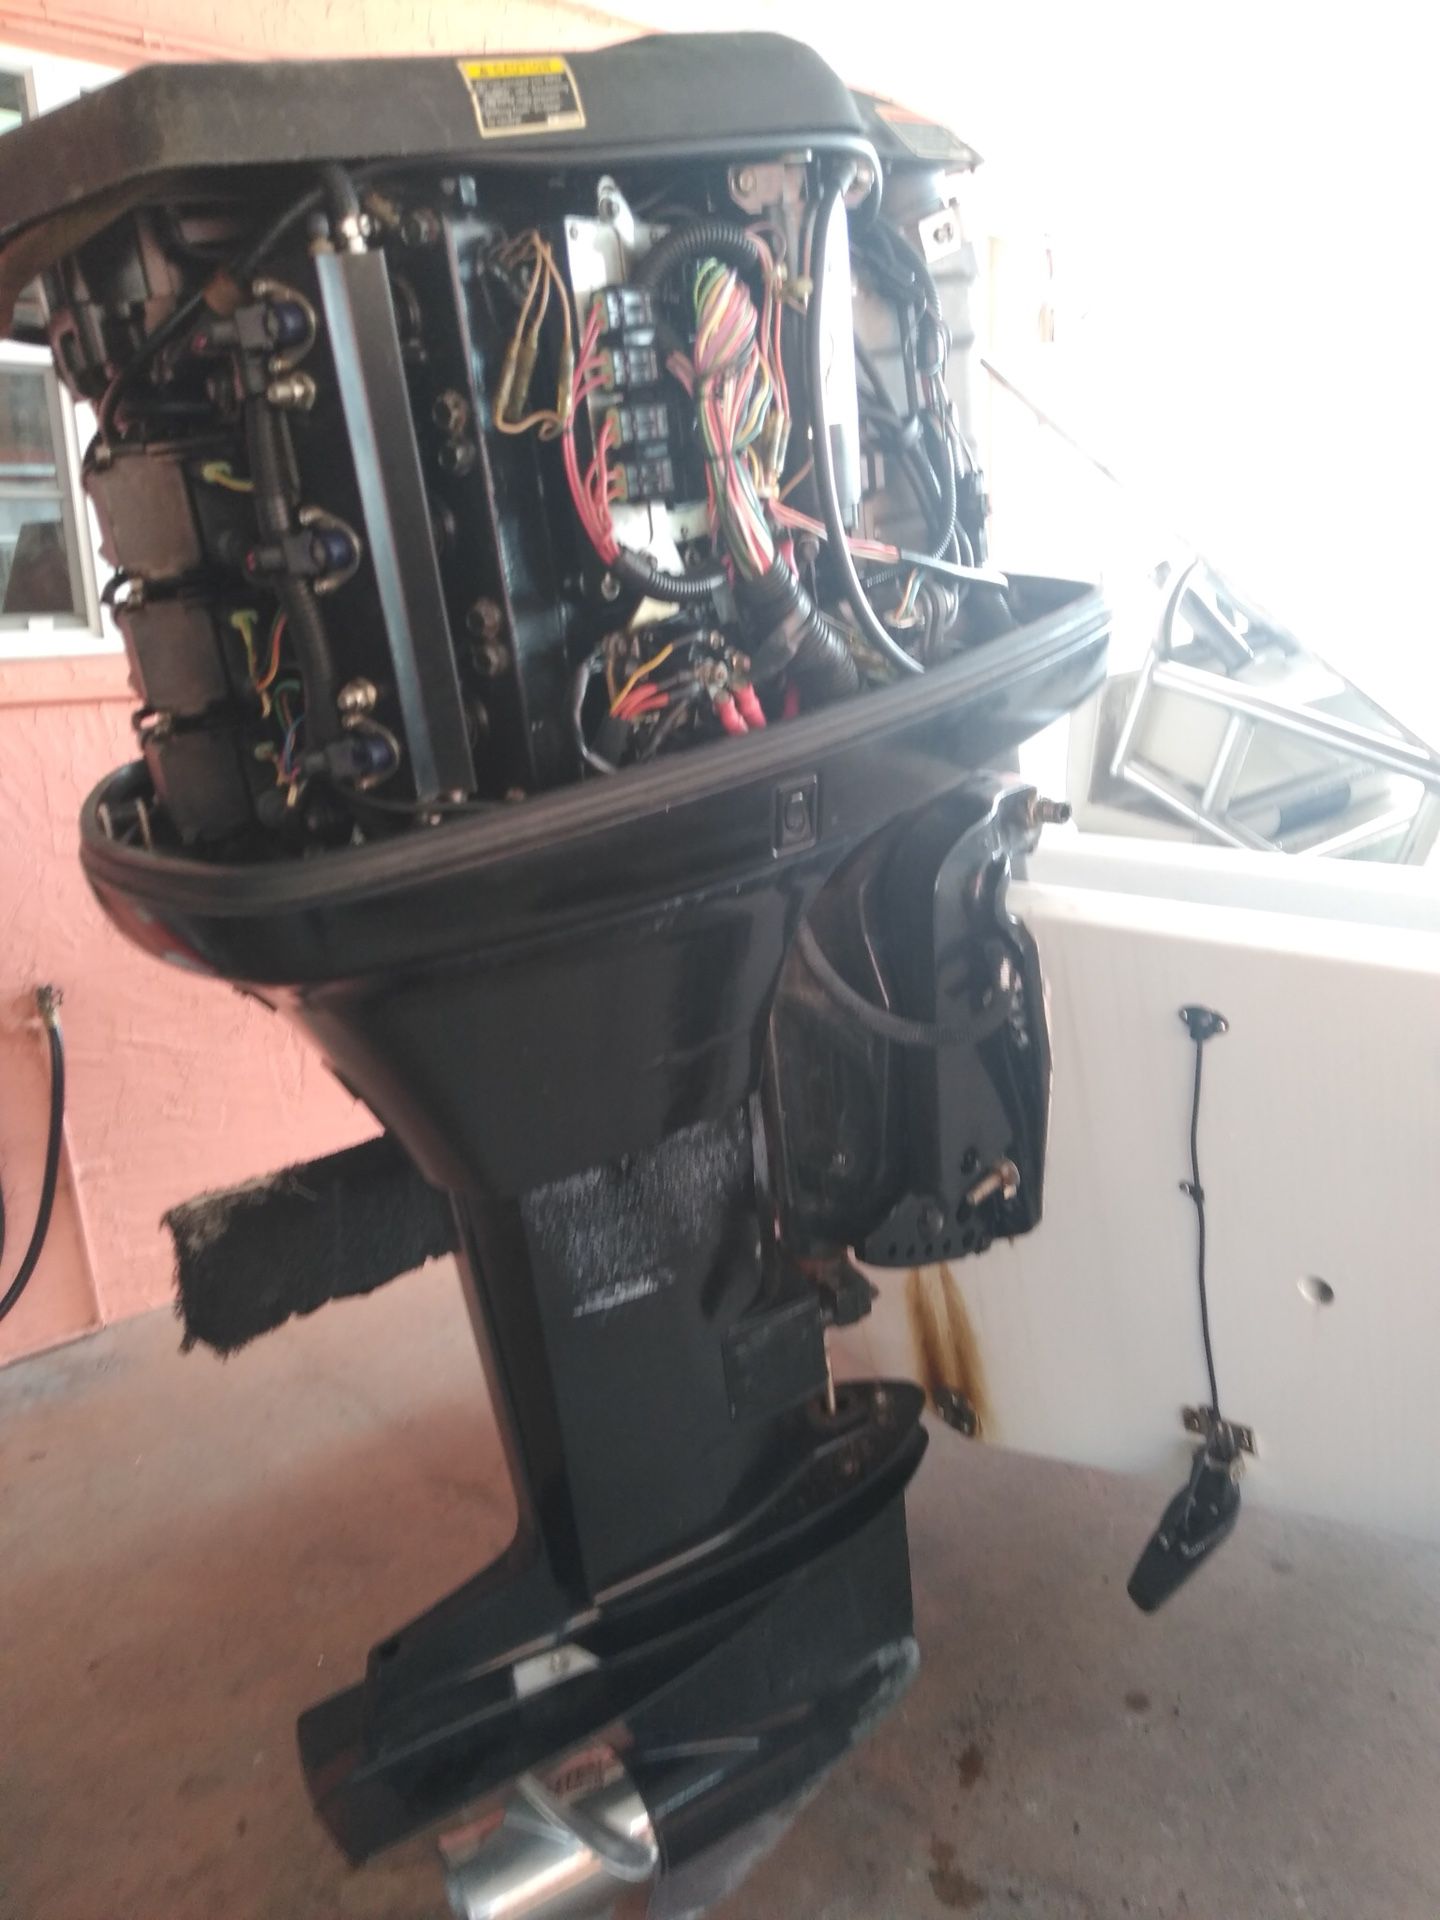 1999 Mercury 135 hp V6 Optimax Outboard Motor 25” Shaft 711 Hours Only